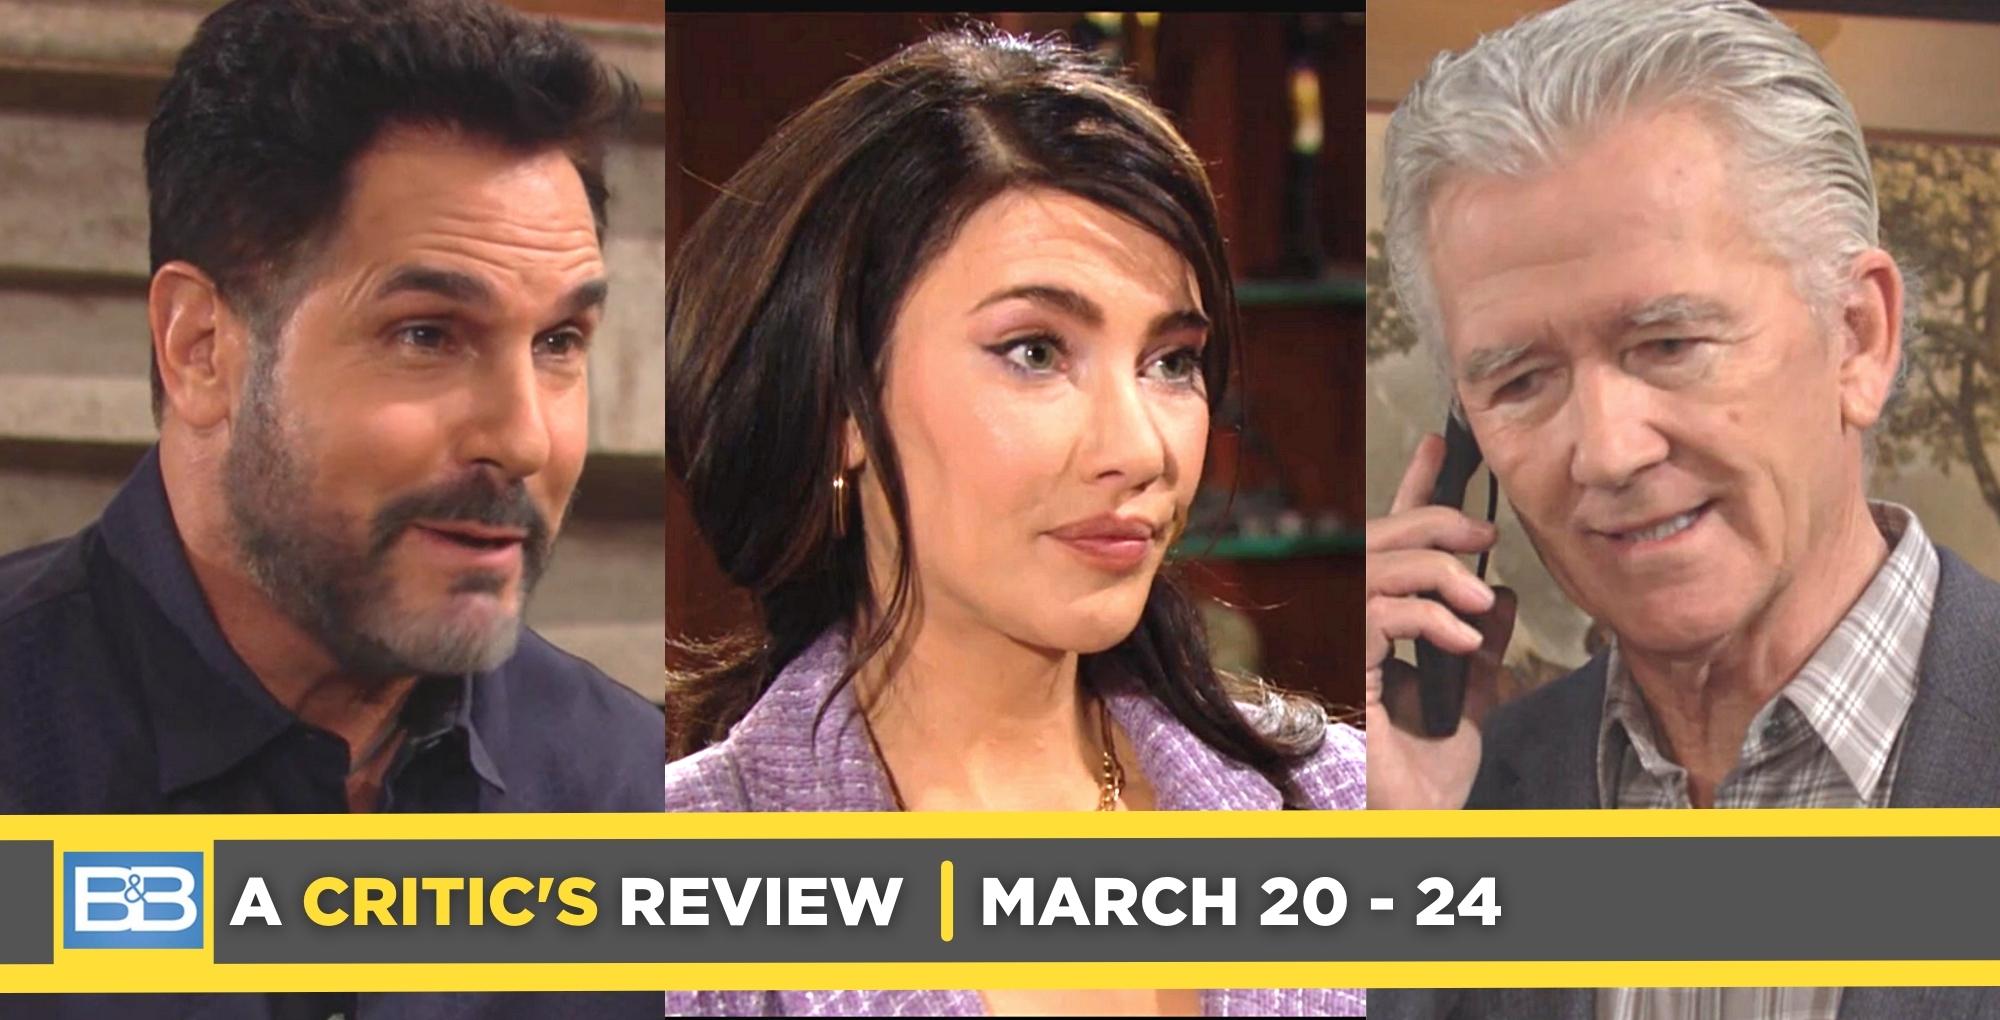 the bold and the beautiful critic's review for march 20 – march 24, 2023, three images bill, steffy, and stephen